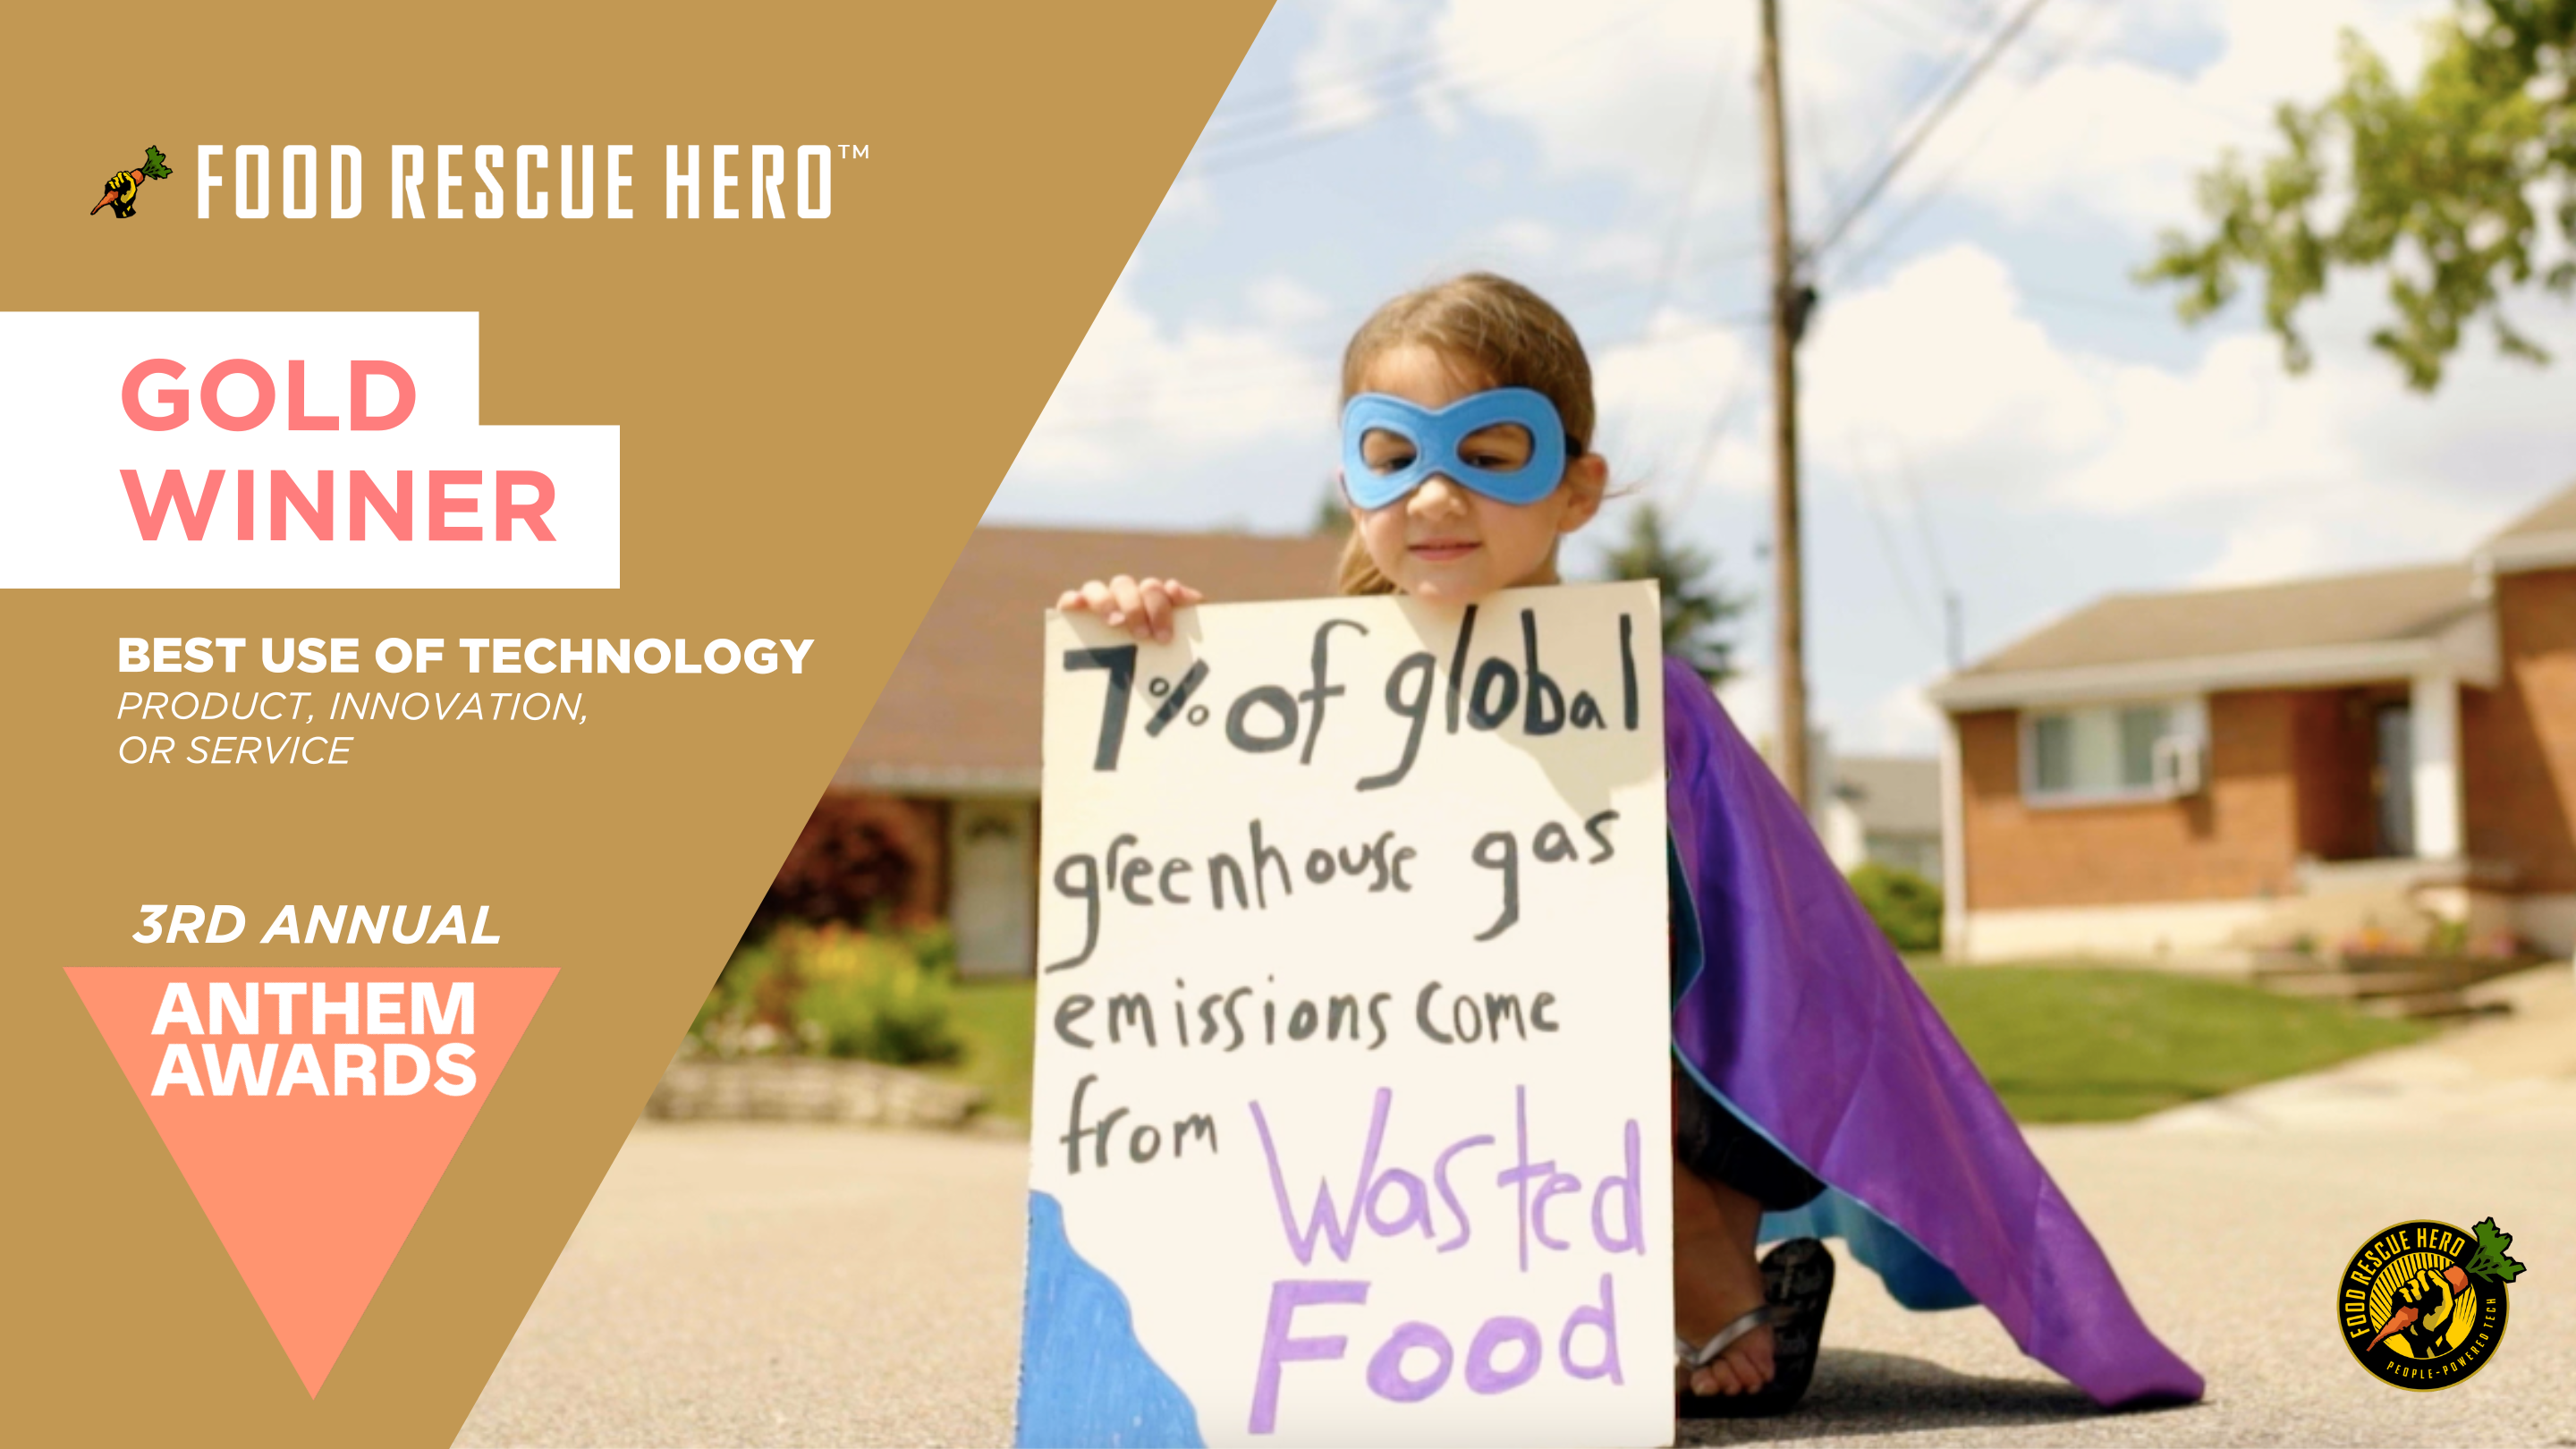 Food Rescue Hero Announced as a Gold Winner in Sustainability, Environment and Climate for the 3rd Annual Anthem Awards.